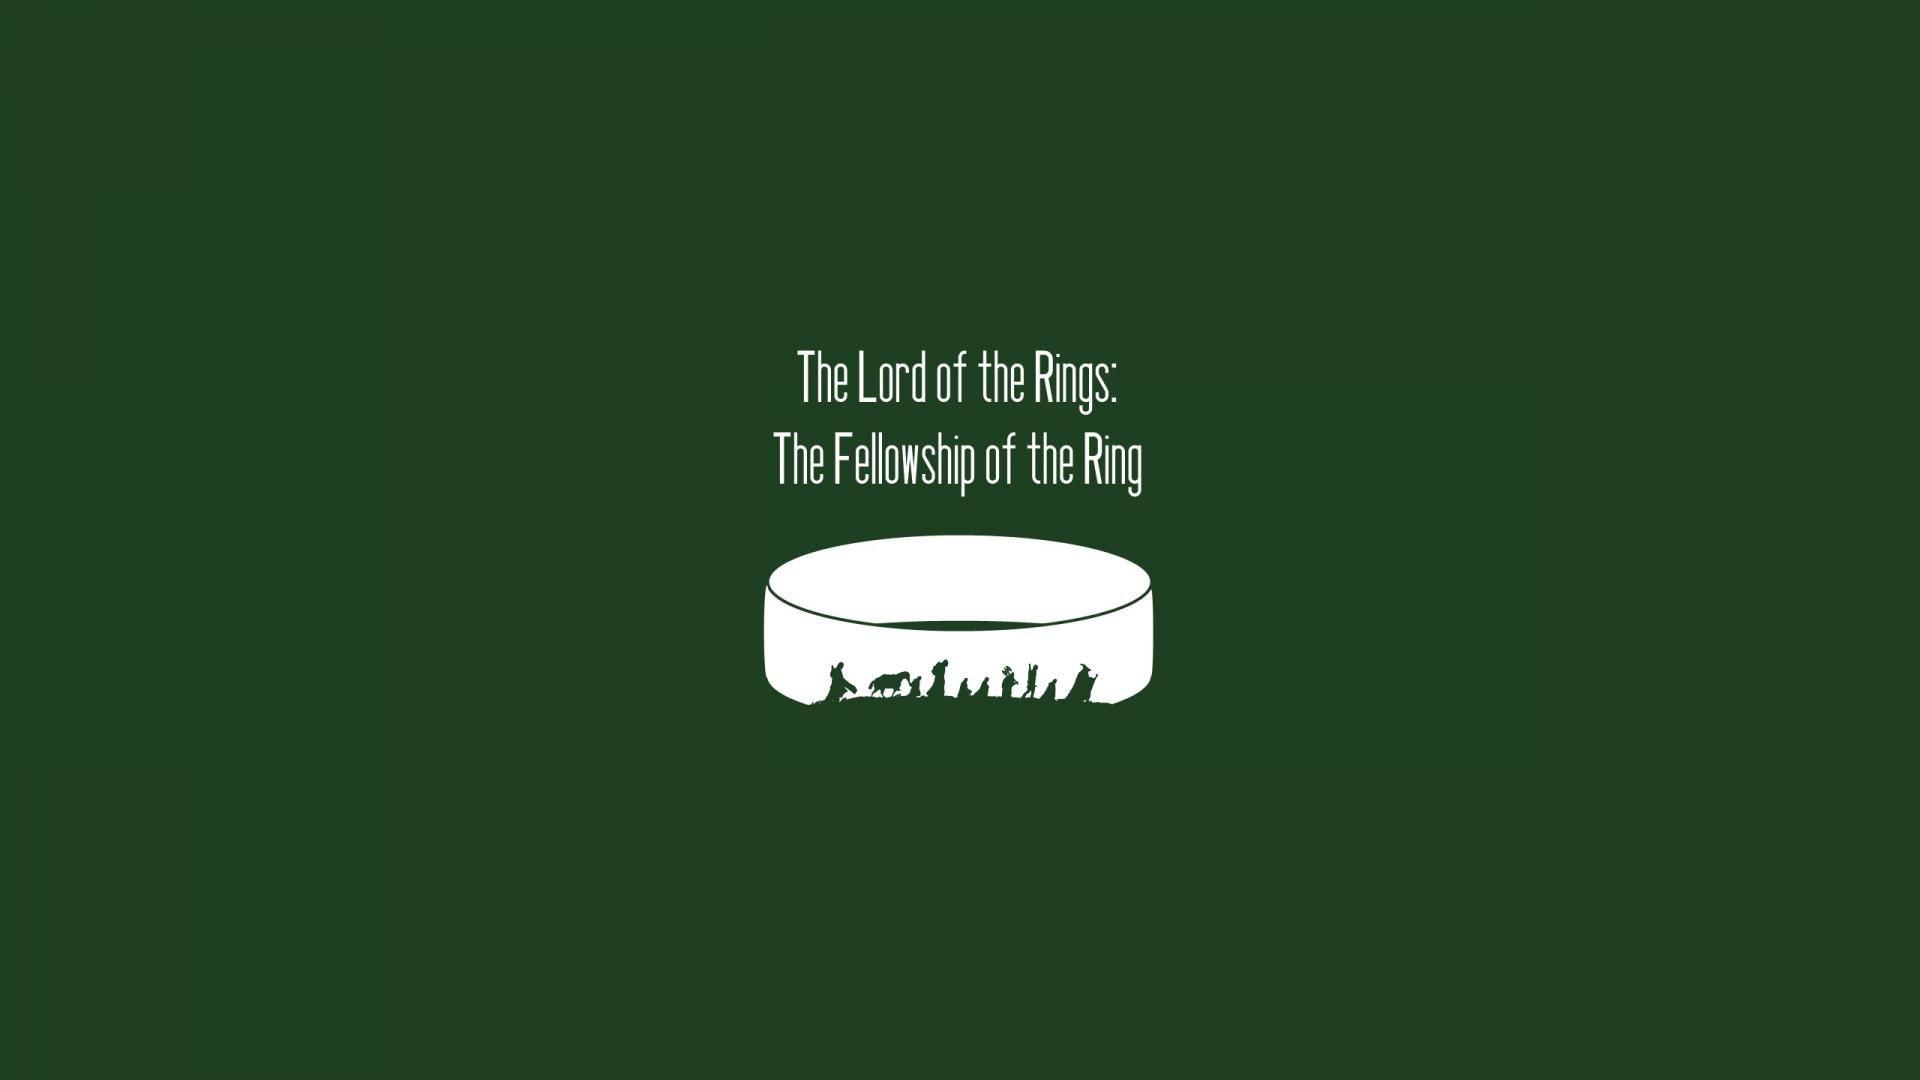 Fellowship Of The Ring Wallpaper. picture the lord of the rings